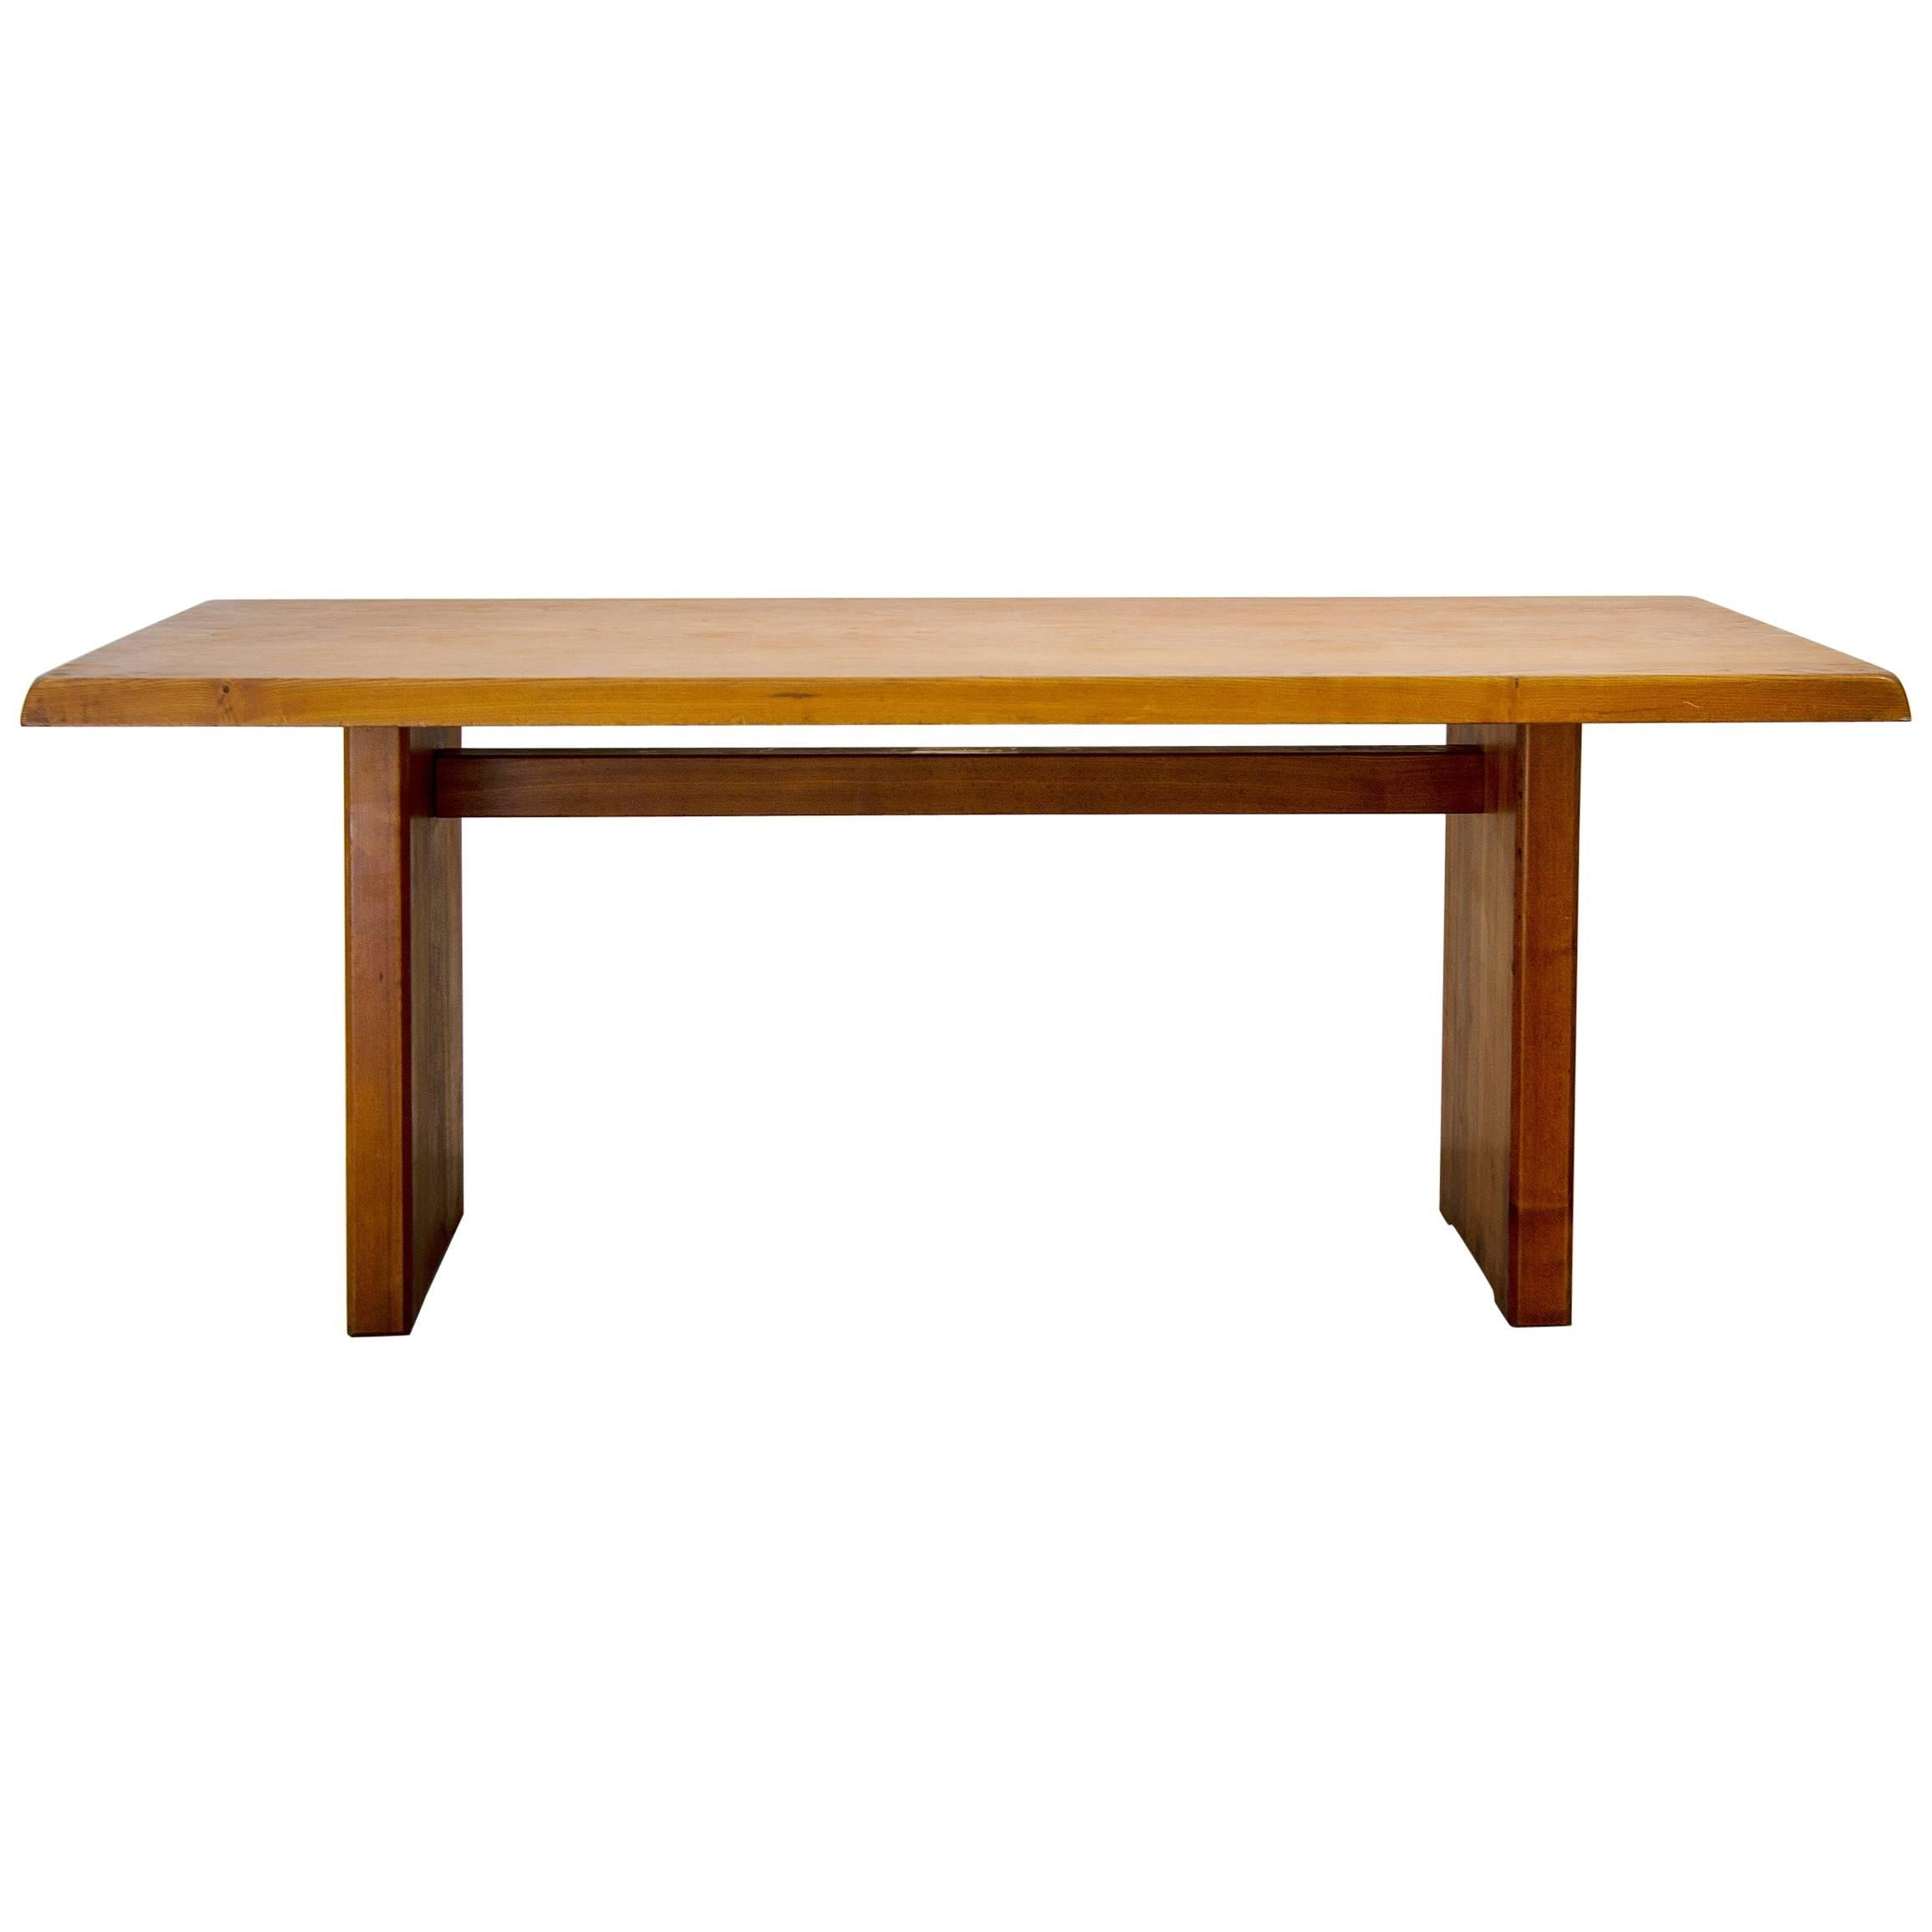 Pierre Chapo Midcentury, solid elm table, 1960s, France